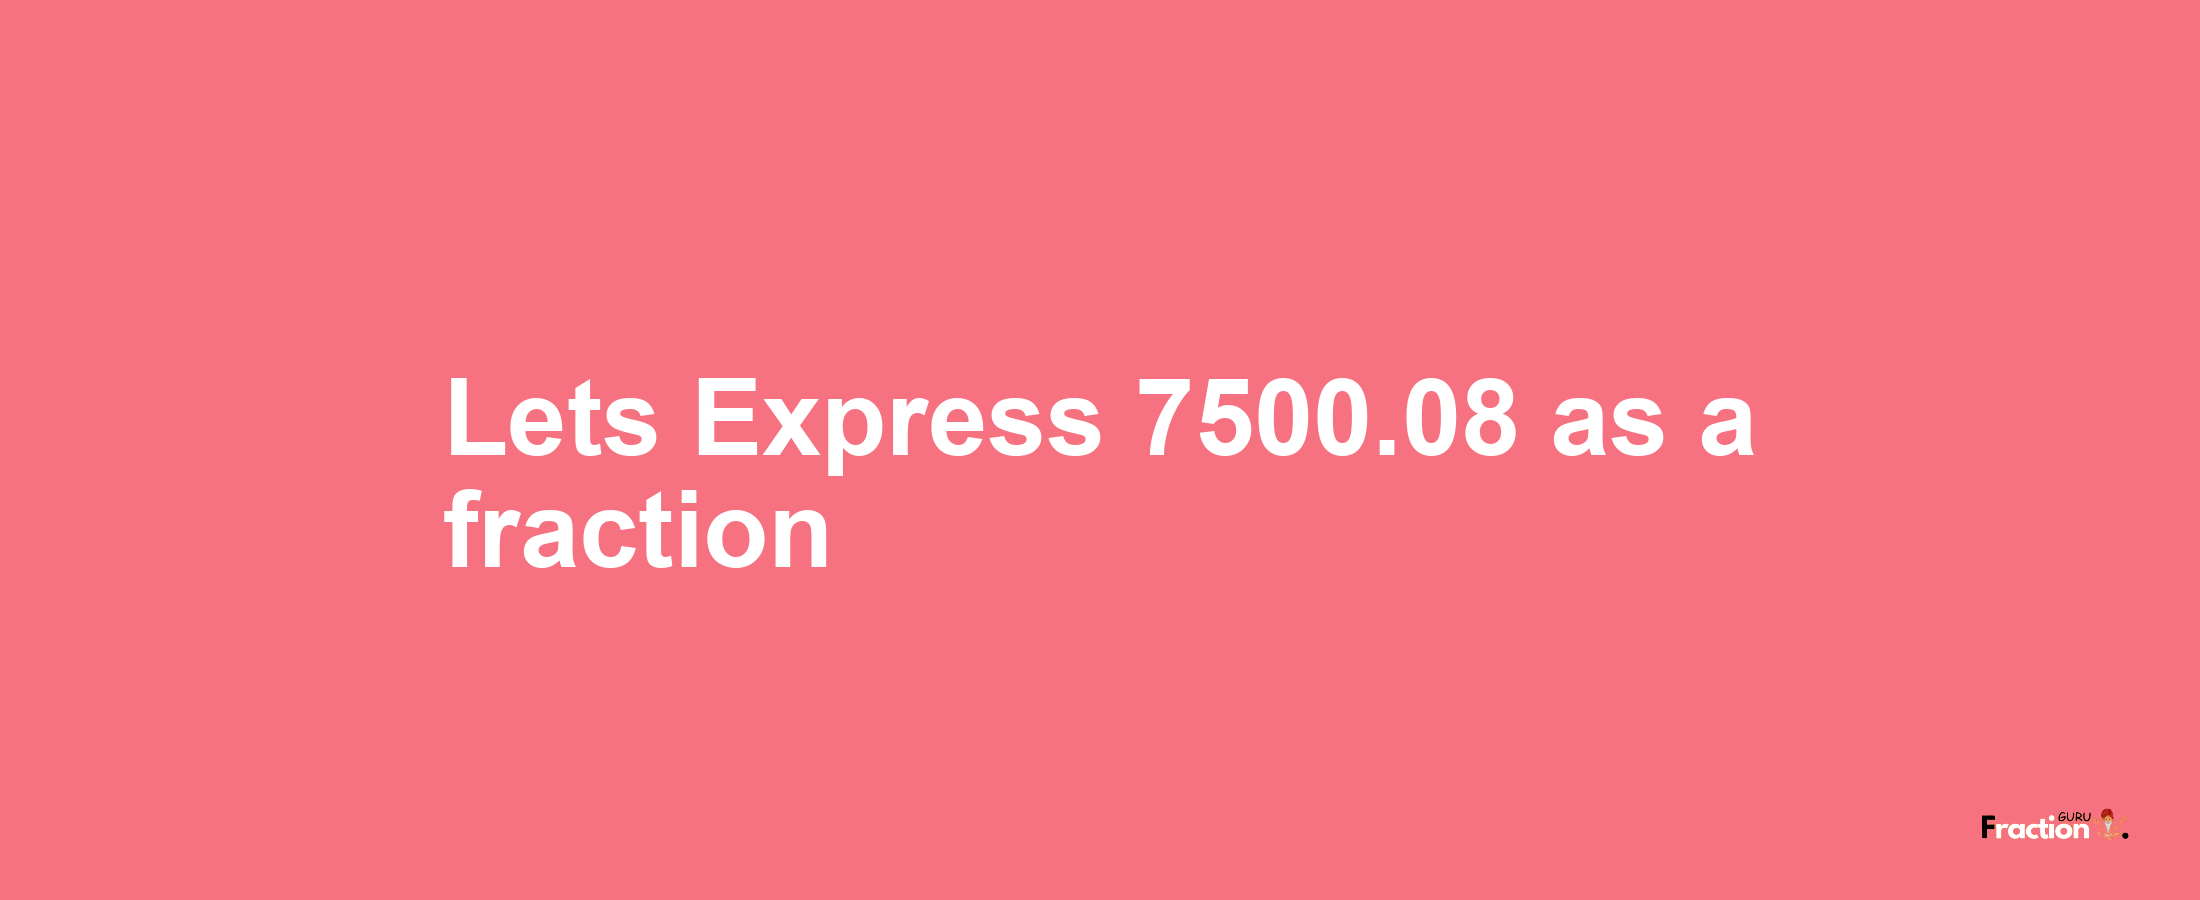 Lets Express 7500.08 as afraction